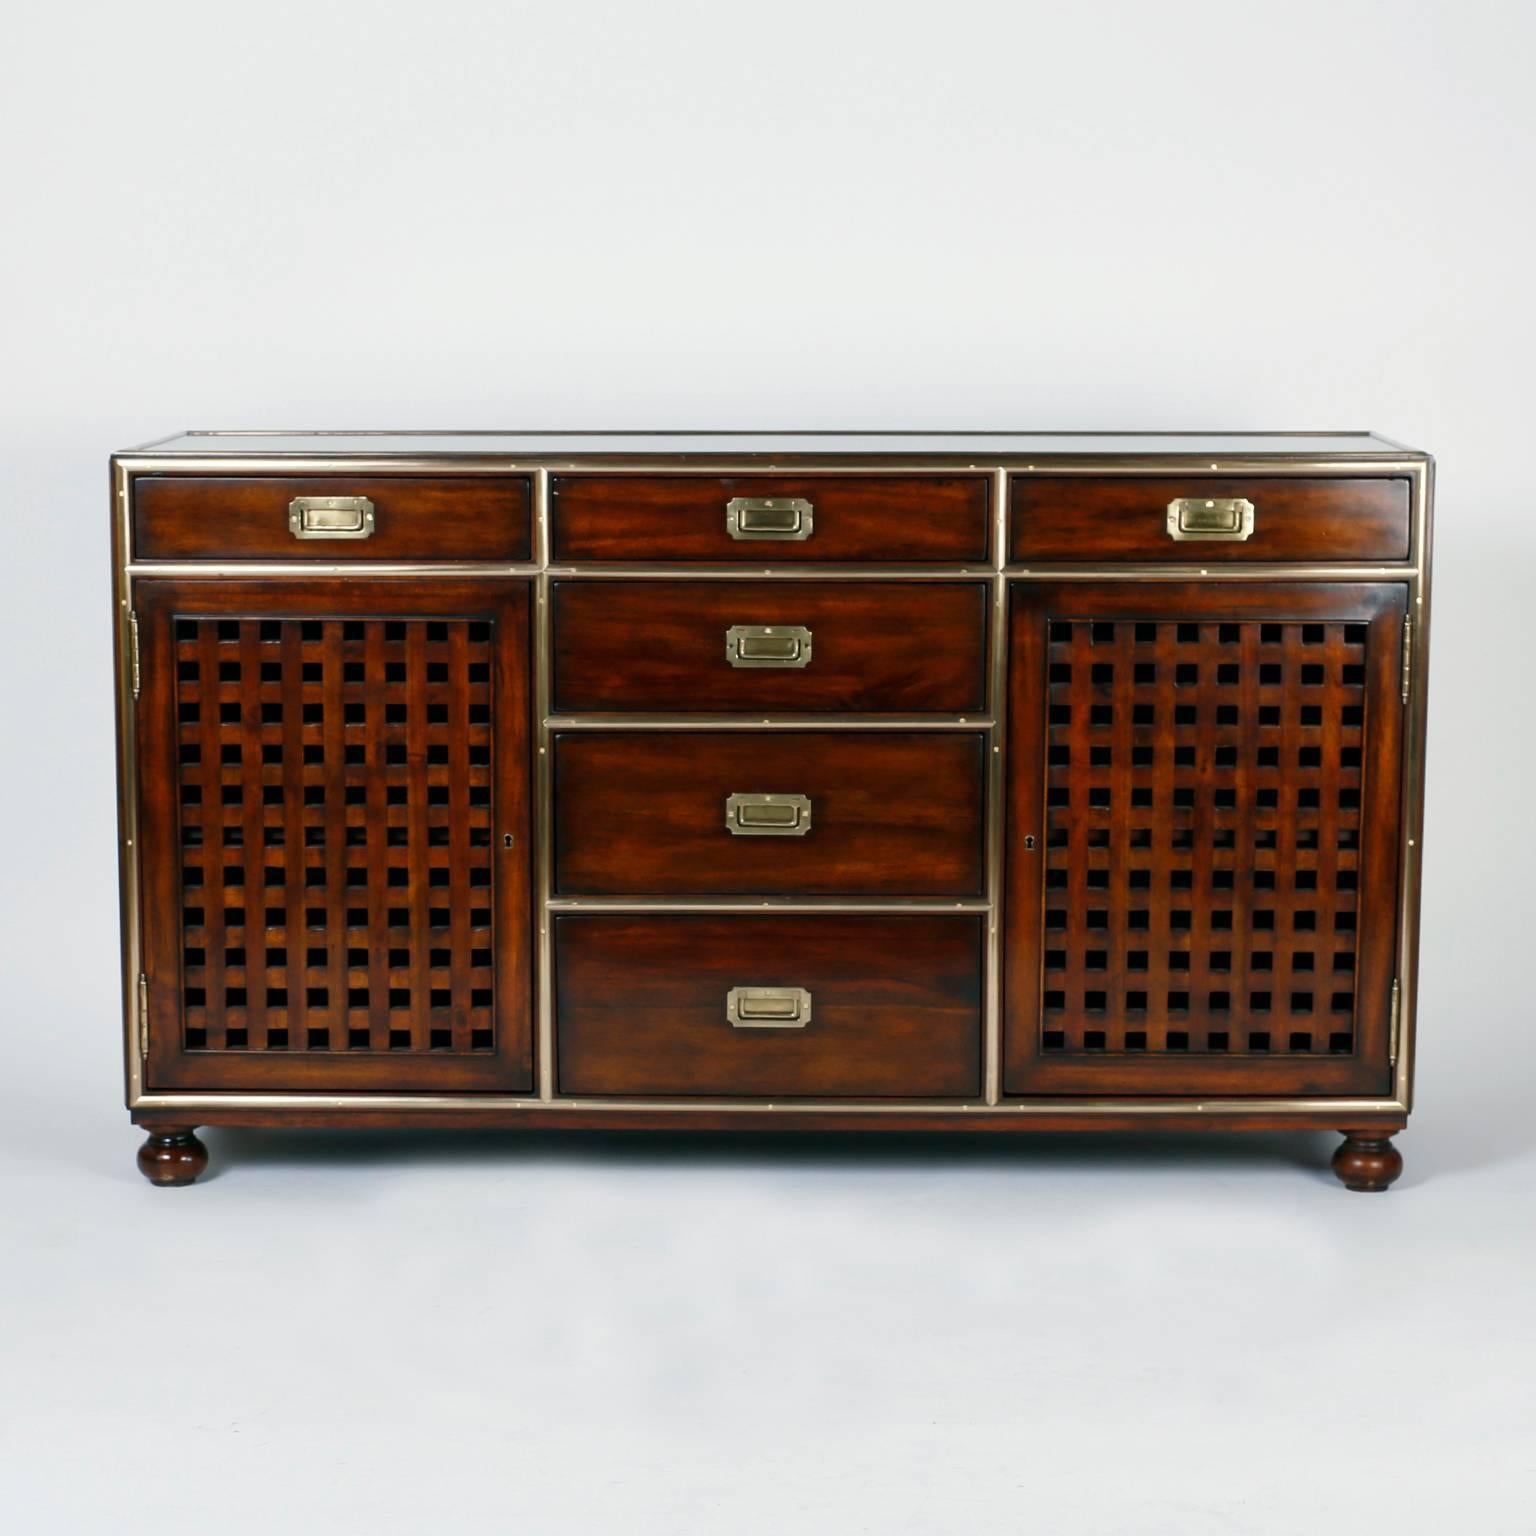 Fine pair of midcentury campaign style mahogany cabinets or servers with hand polished and lacquered brass hardware, six drawers, and two grated doors for plenty of storage. Signed Theodore Alexander on a brass plaque.